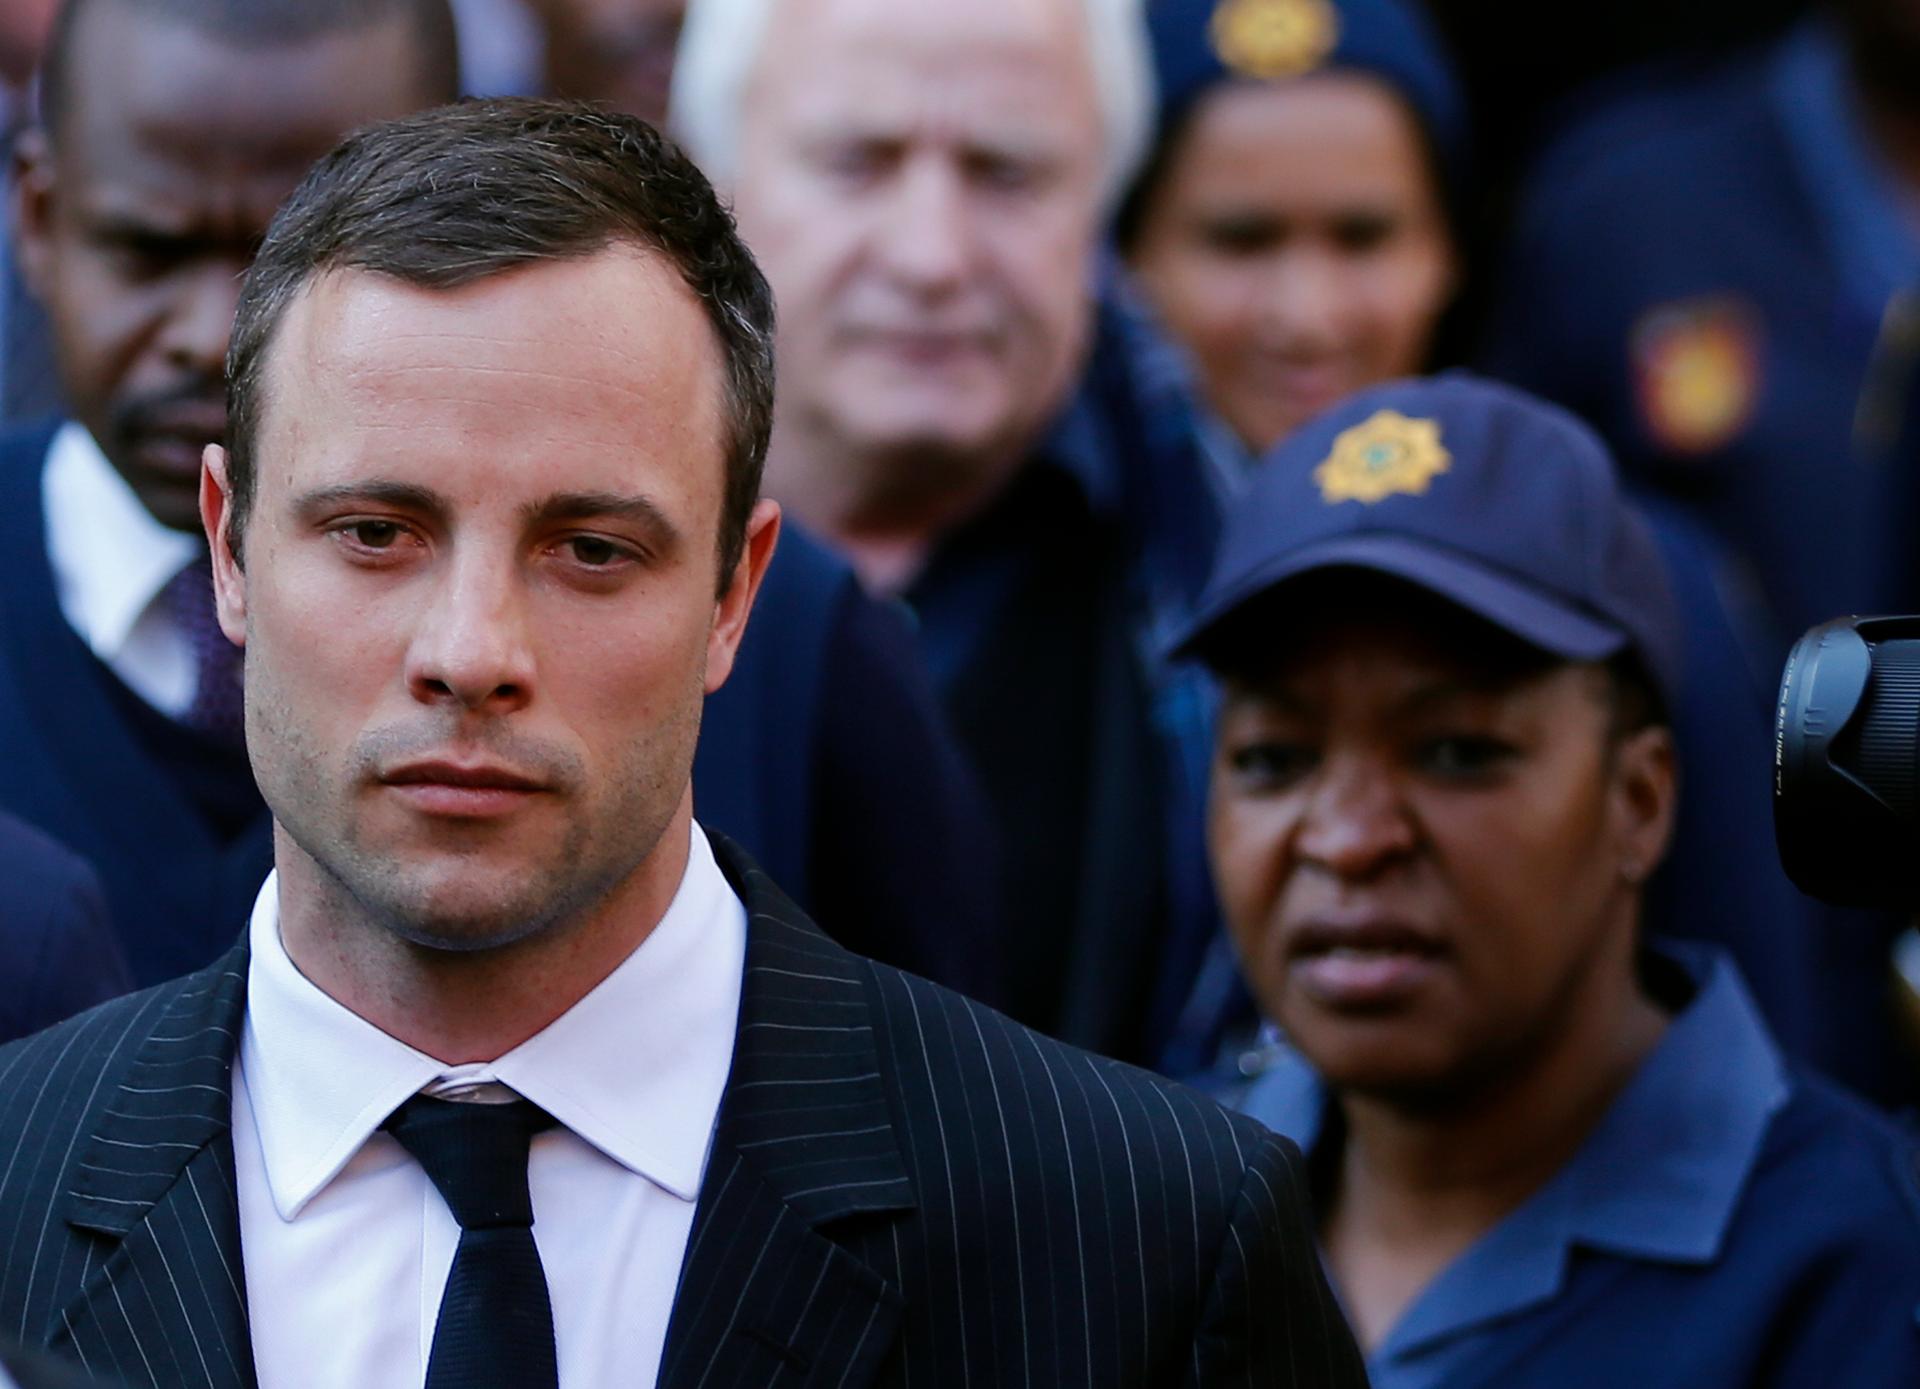 Paralympic track star Oscar Pistorius has been serving a five-year sentence for culpable homicide for the killing of Reeva Steenkamp on February 13, 2013. On August 19th, South African Justice Minister Michael Masutha said Pistorius will not be freed on p